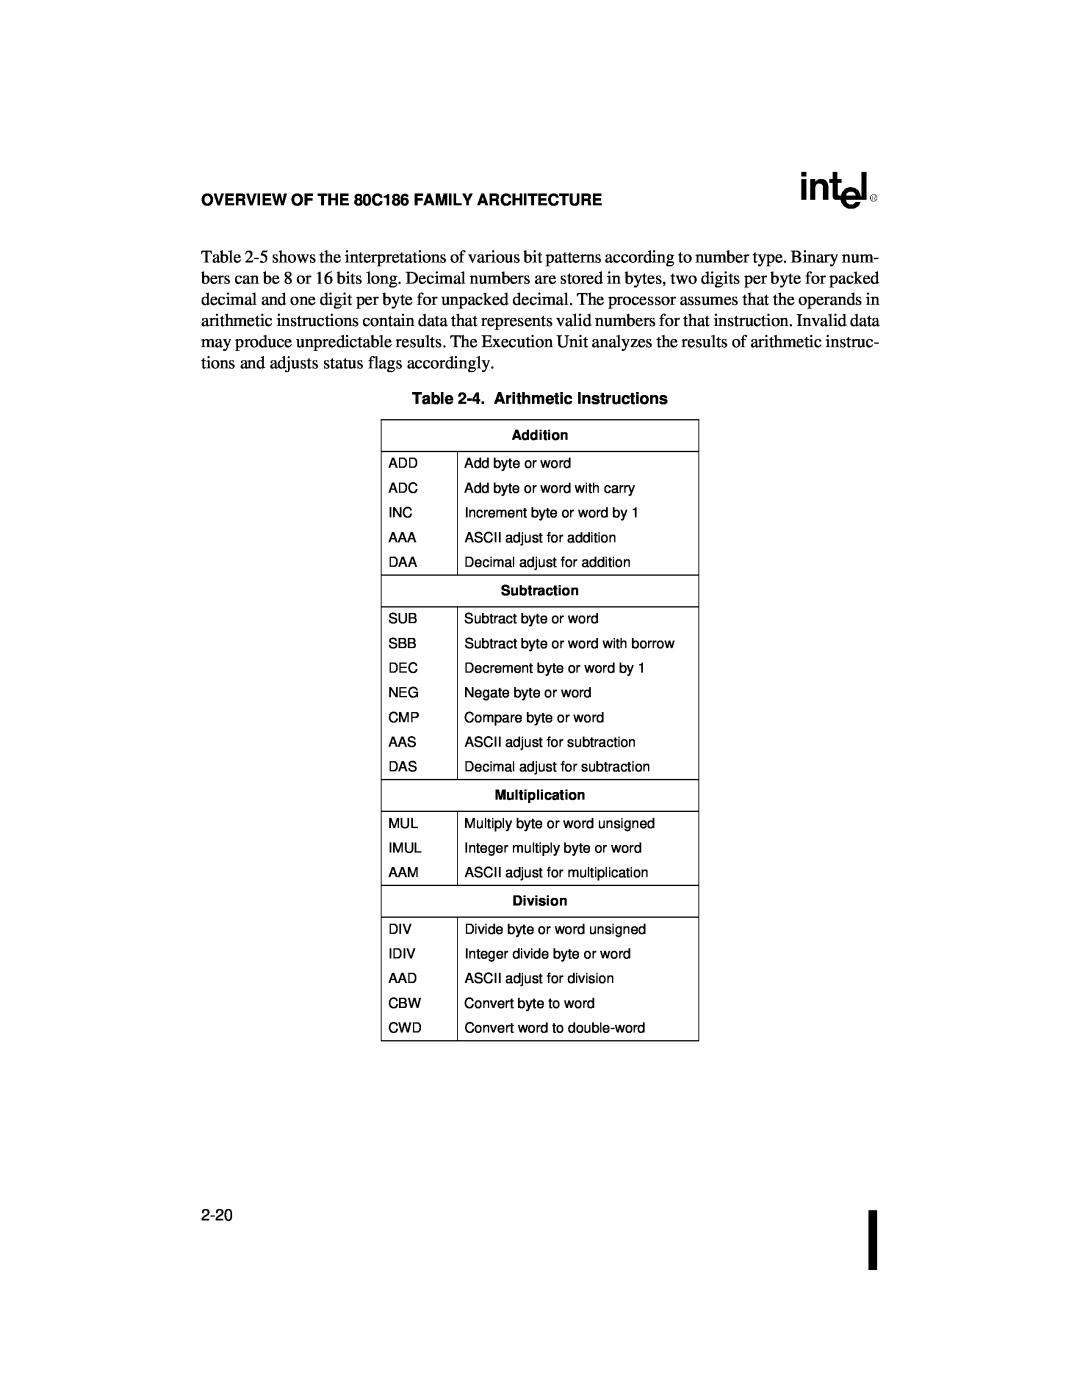 Intel 80C186XL OVERVIEW OF THE 80C186 FAMILY ARCHITECTURE, 4.Arithmetic Instructions, Addition, Subtraction, Division 